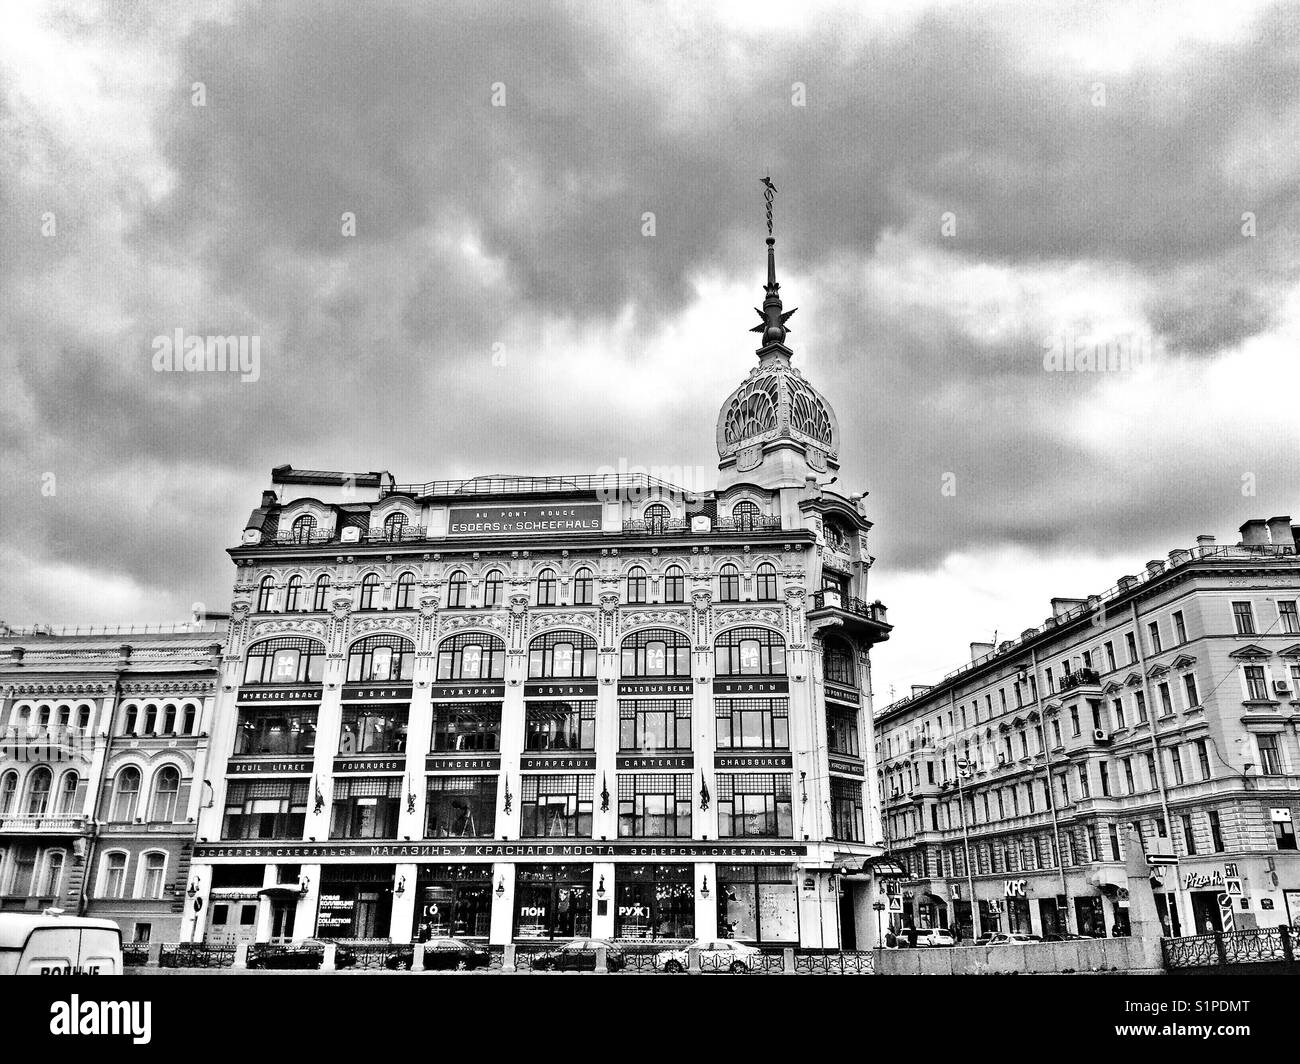 Typical European city street in black and white Stock Photo